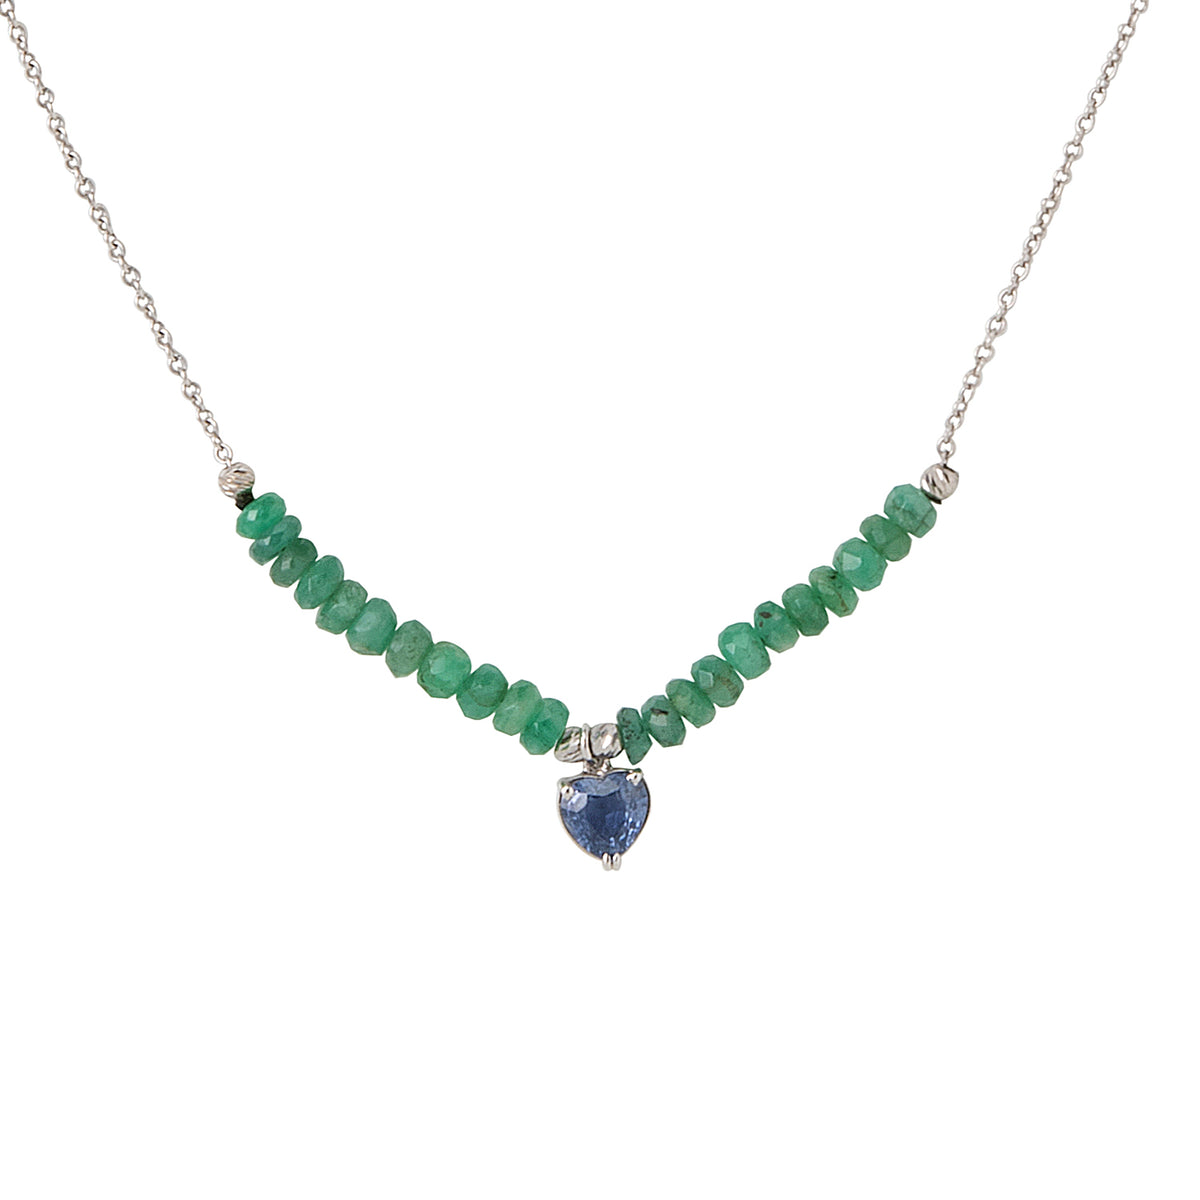 Blue sapphire heart with emerald beads and chain